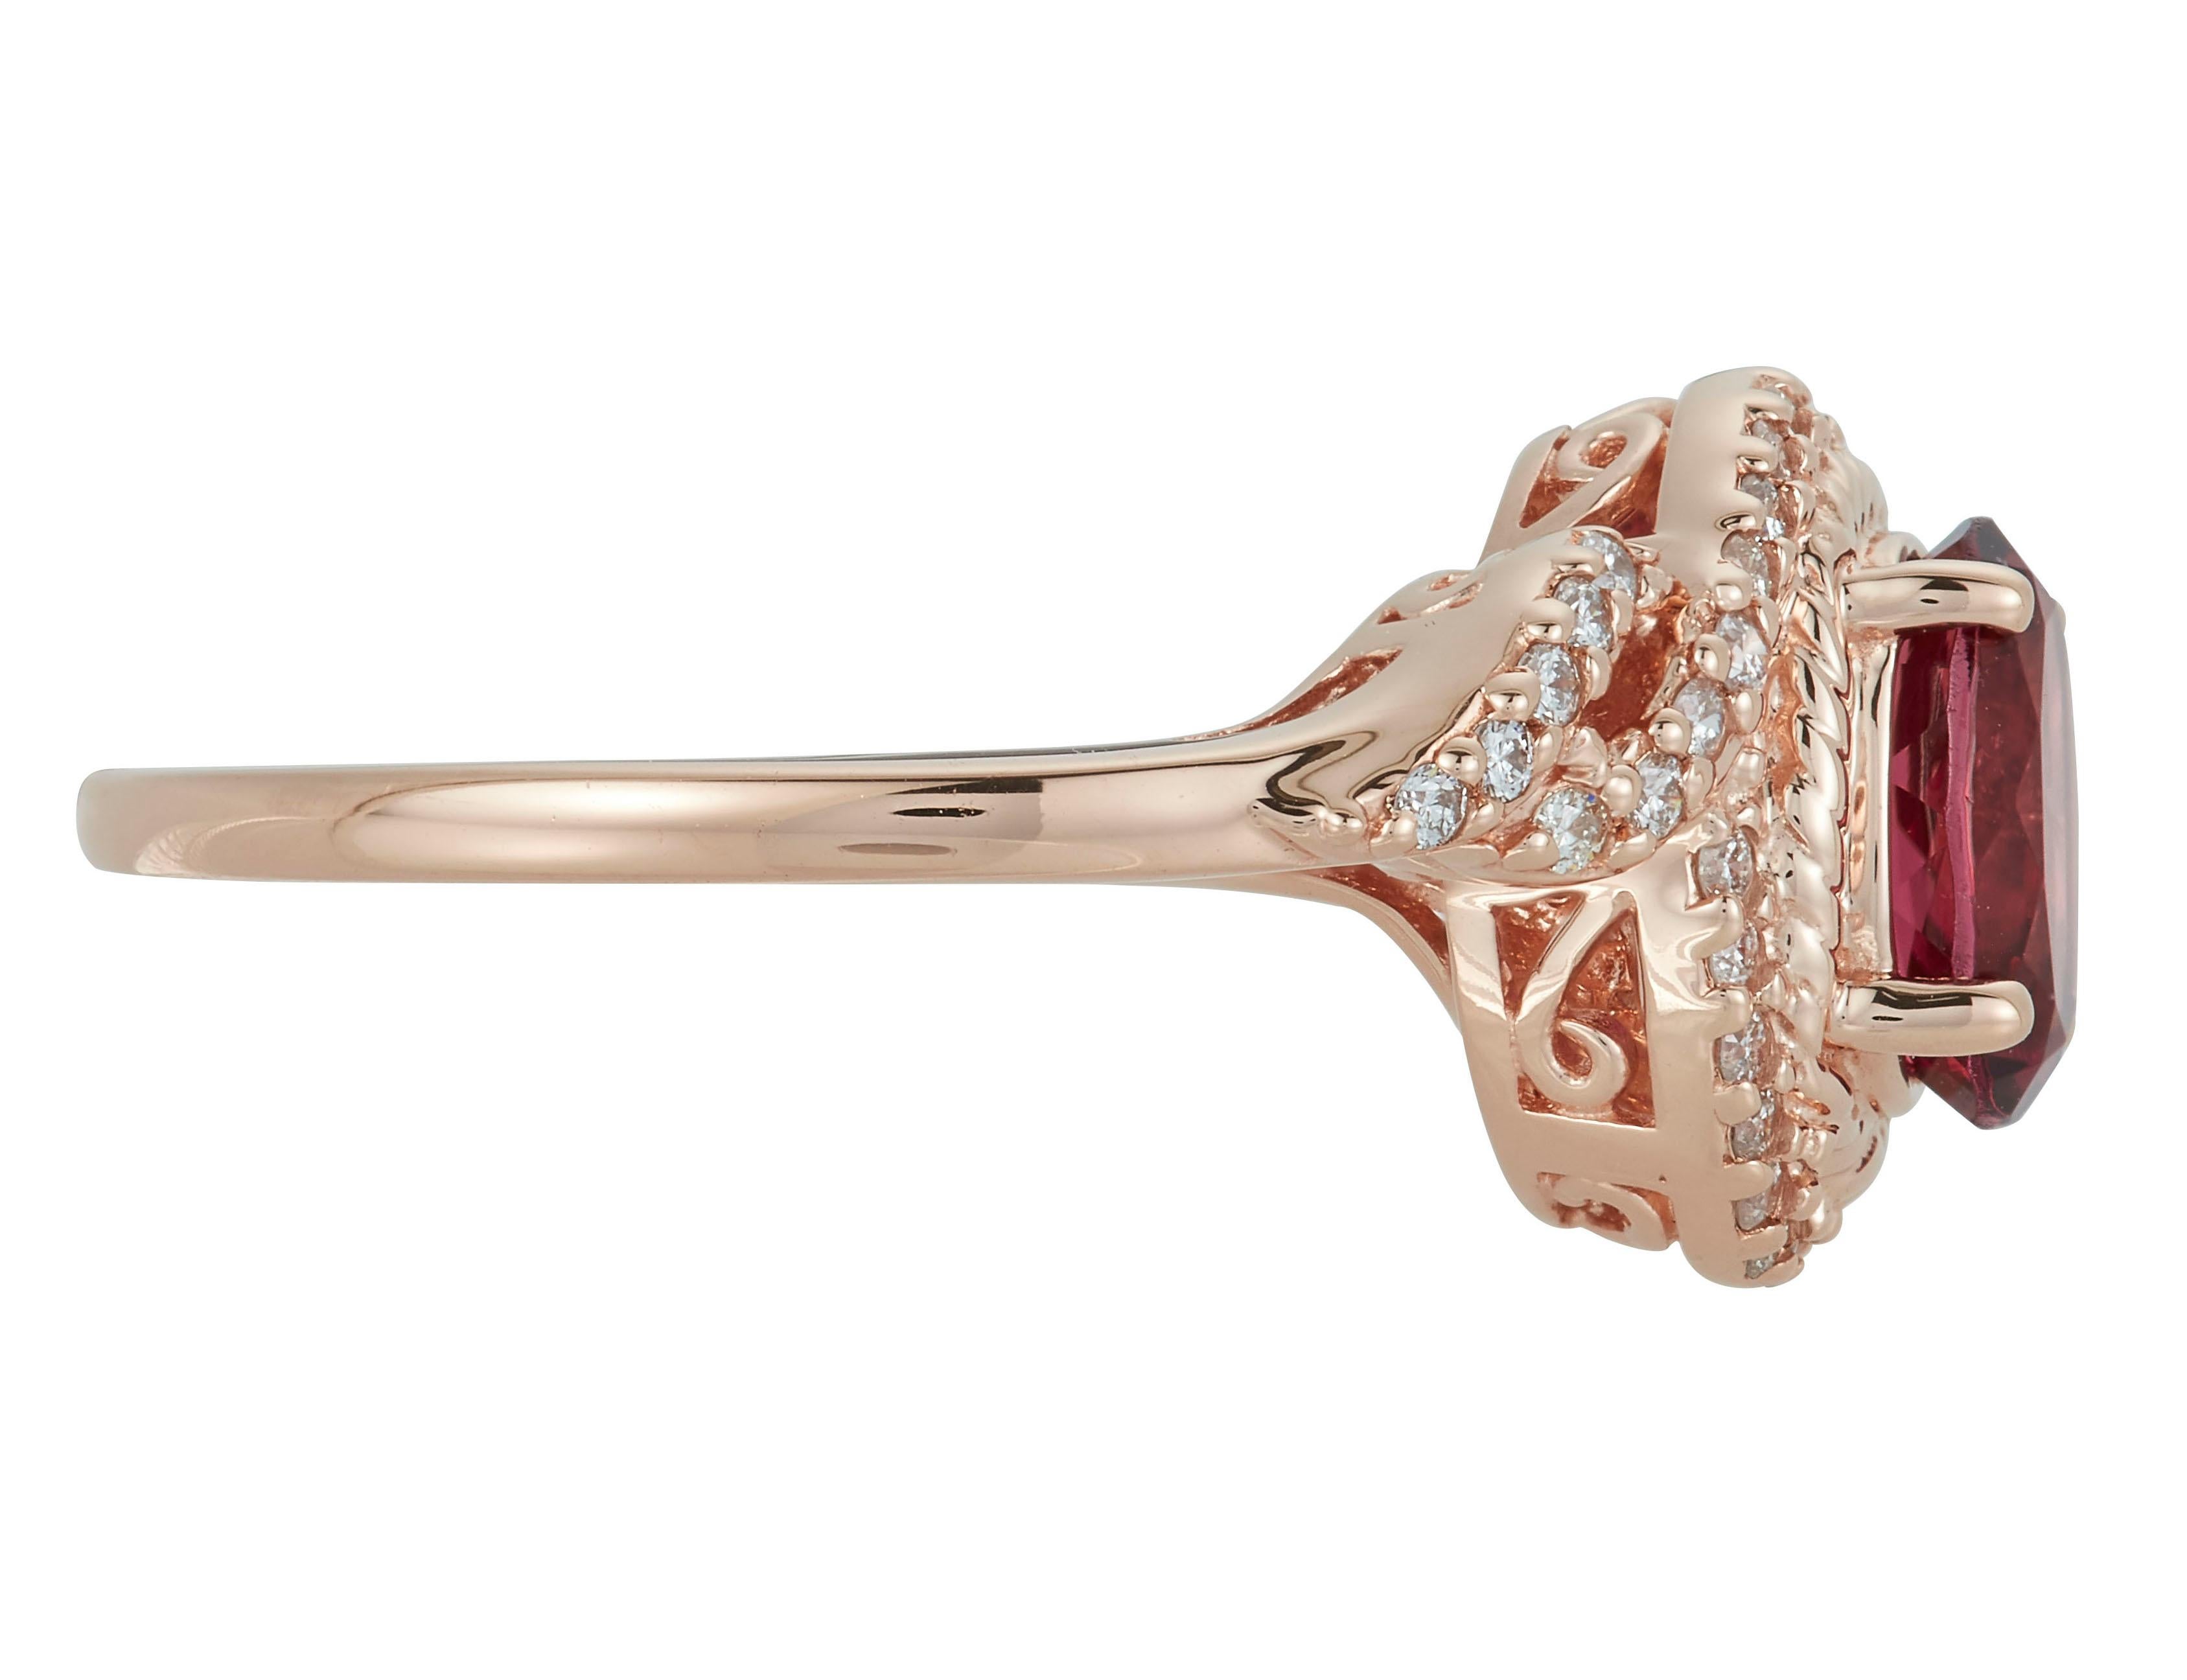 14K Rose Gold
1 Oval Pink Tourmaline at 1.22 Carat- Measuring 7.8 x 5.7
42 Brilliant Round White Diamonds at 0.25 Carats - Color: H-I /Clarity: SI

Alberto offers complimentary sizing on all rings.

Fine one-of-a-kind craftsmanship meets incredible